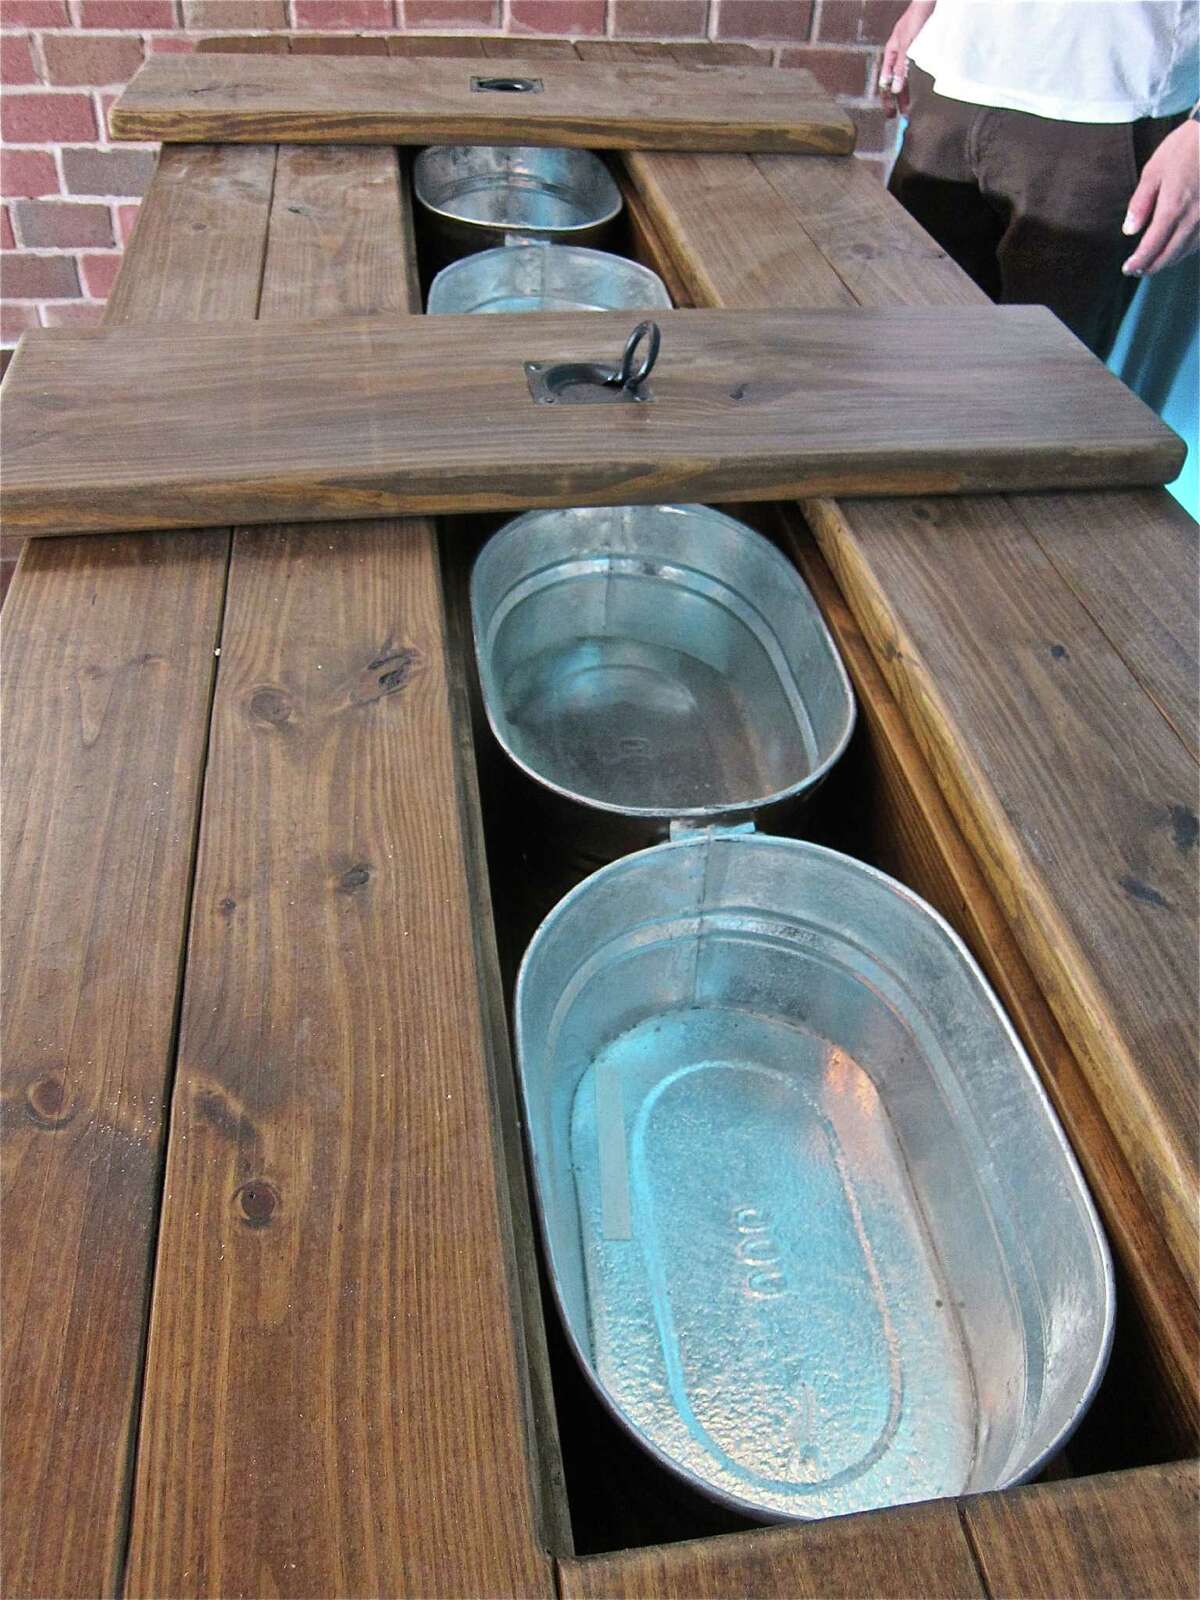 Custom picnic table for large parties at Lillo & Ella, with wells for ice, beverages or utensils.